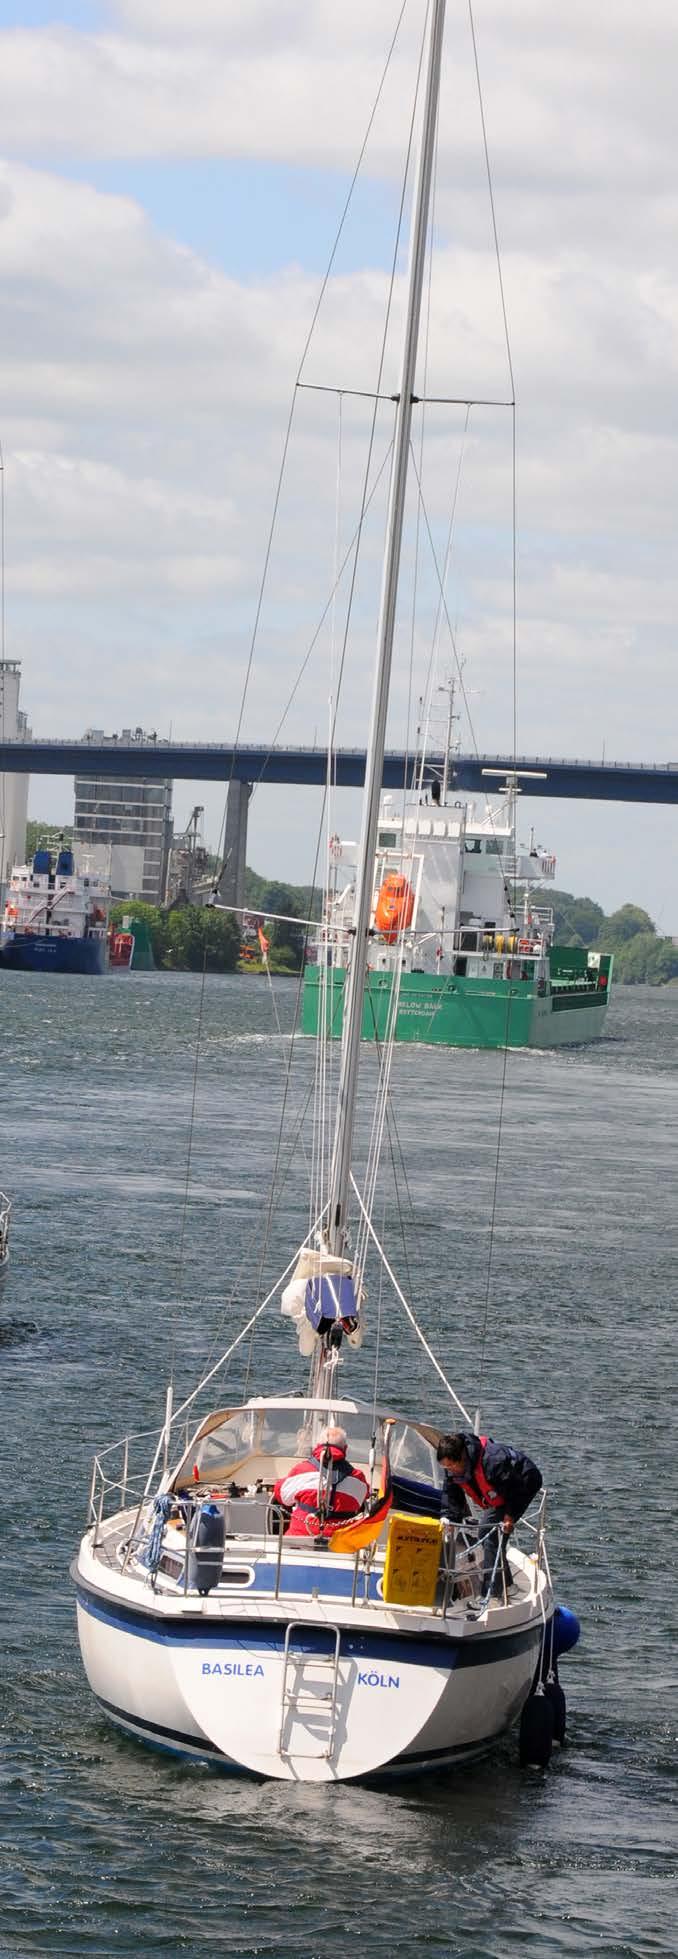 8 Kiel Canal Guidance for operators of recreation craft 9 Light signals Daylight navigation hours (CET) Add one hour during CEST Entering the approaches to the Kiel Canal, the lock approaches and